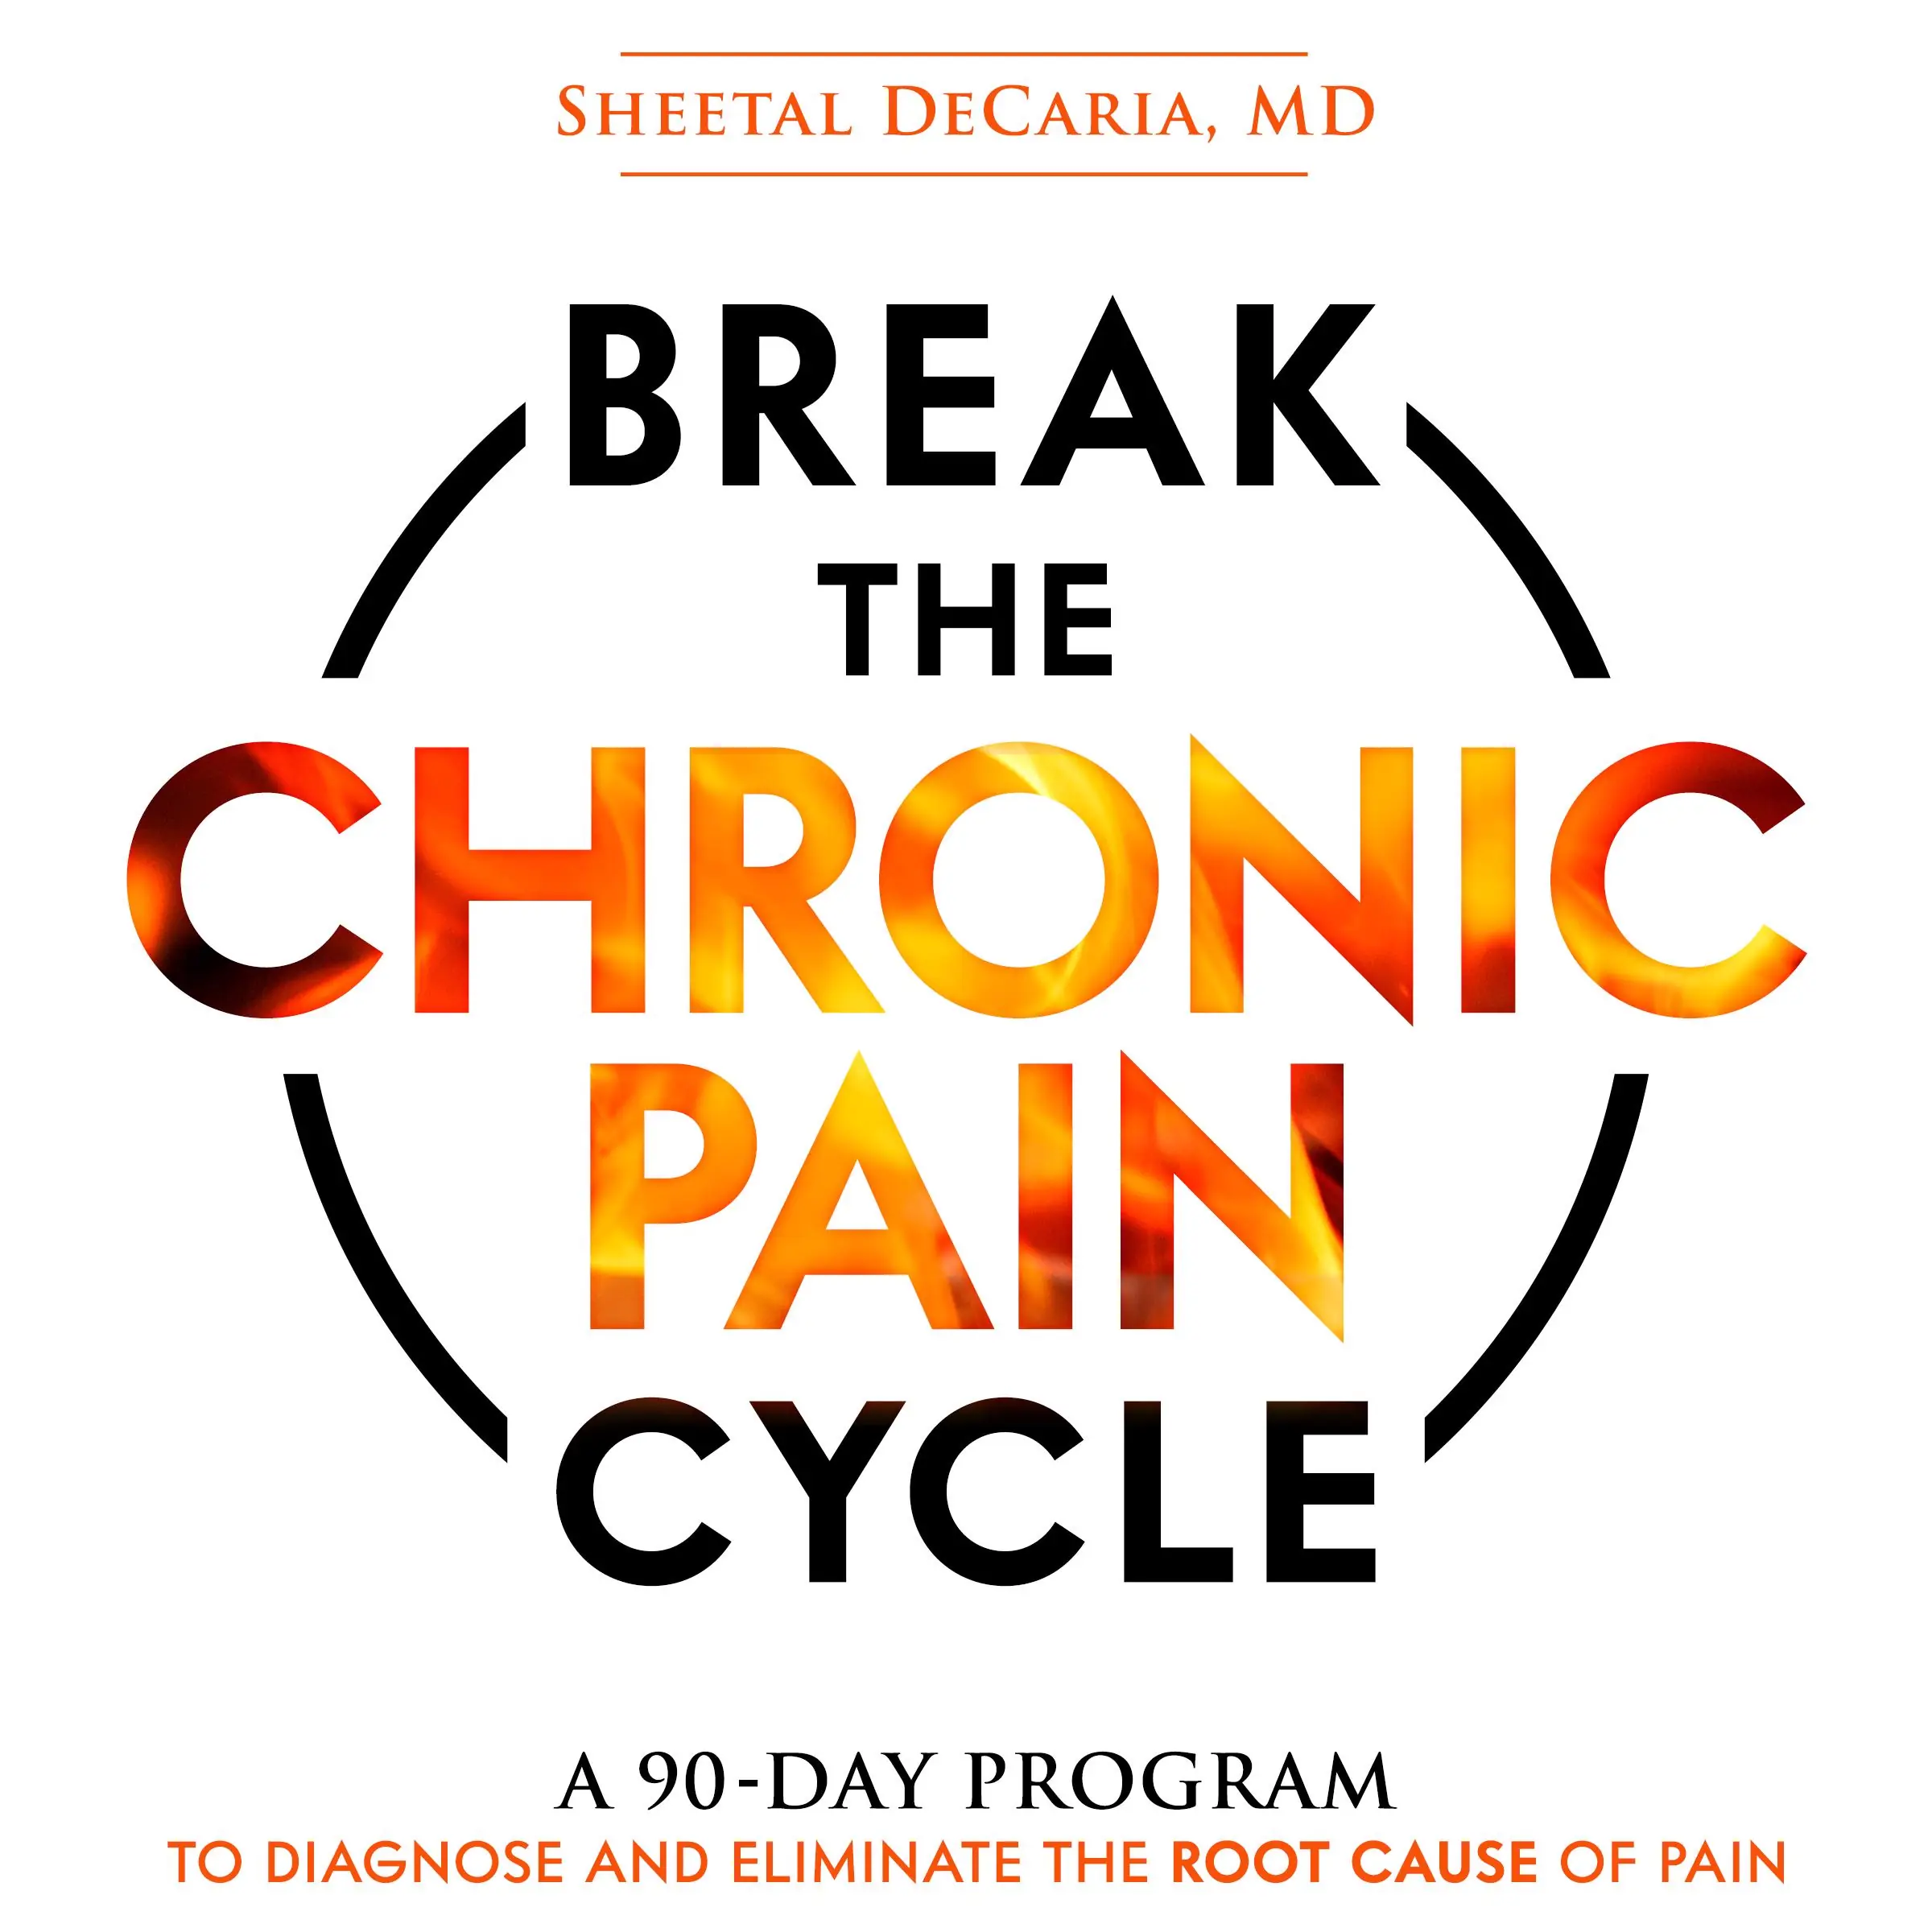 Break the Chronic Pain Cycle Audiobook by Sheetal DeCaria MD